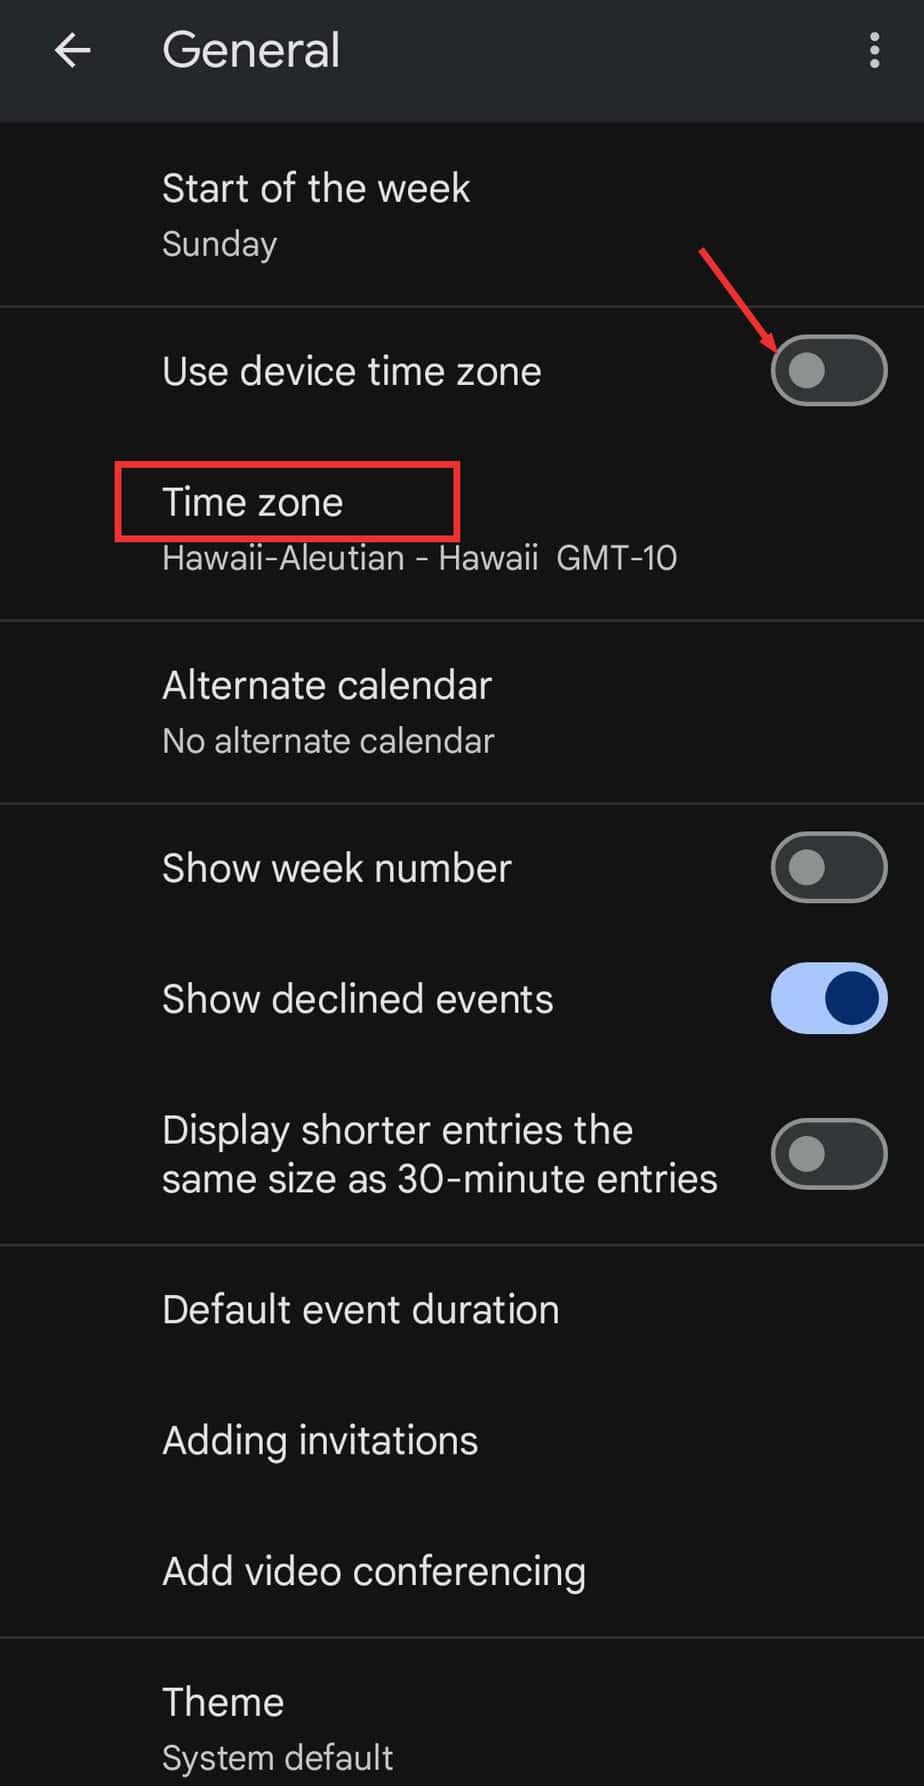 turn-off-device-time-zone-and-click-on-time-zone